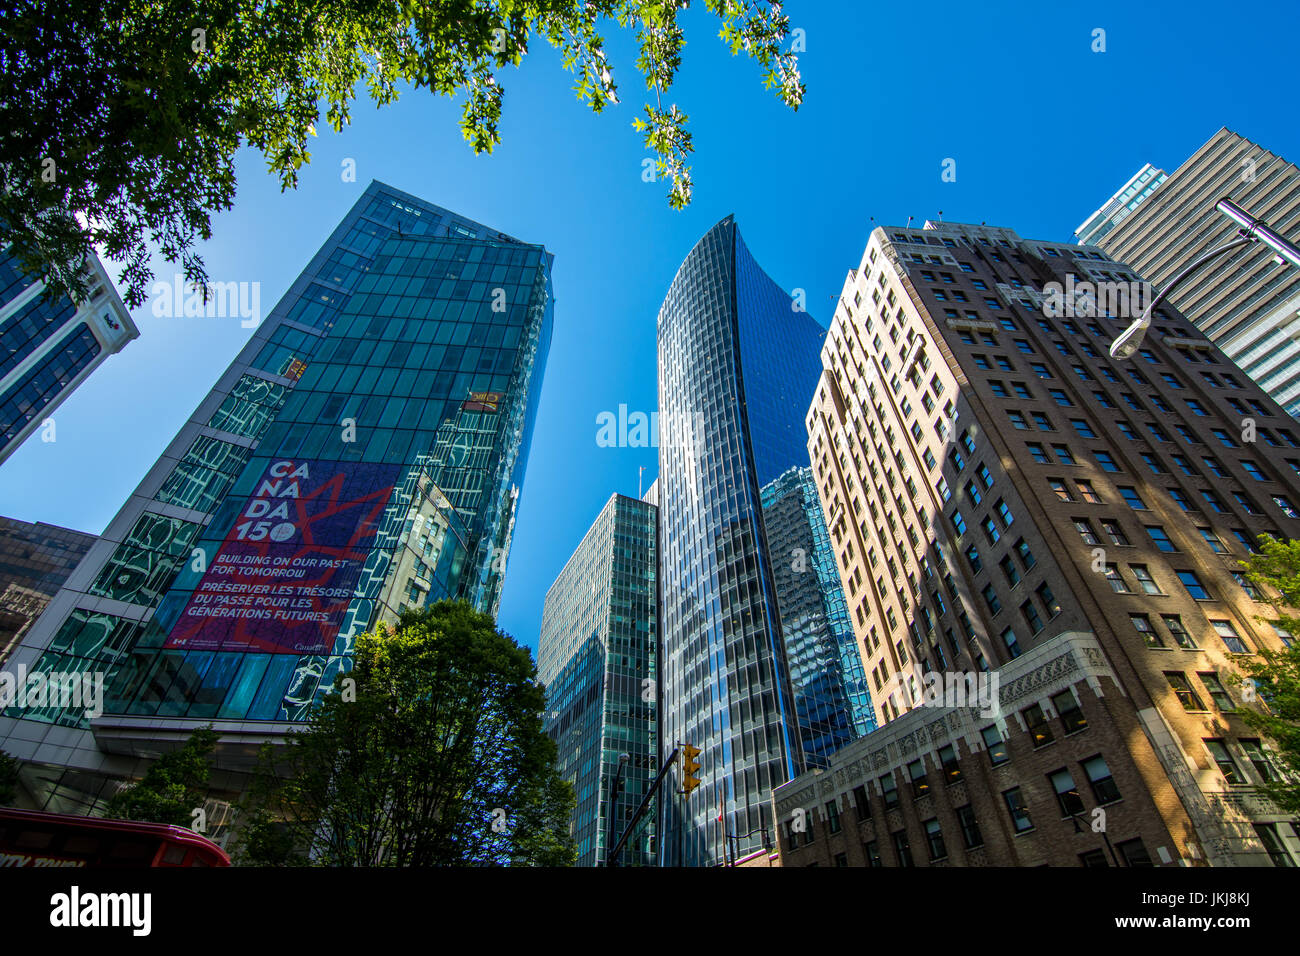 Vancouver, Canada - June 20, 2017: High rises in Vancouver's downtown on a sunny day Stock Photo